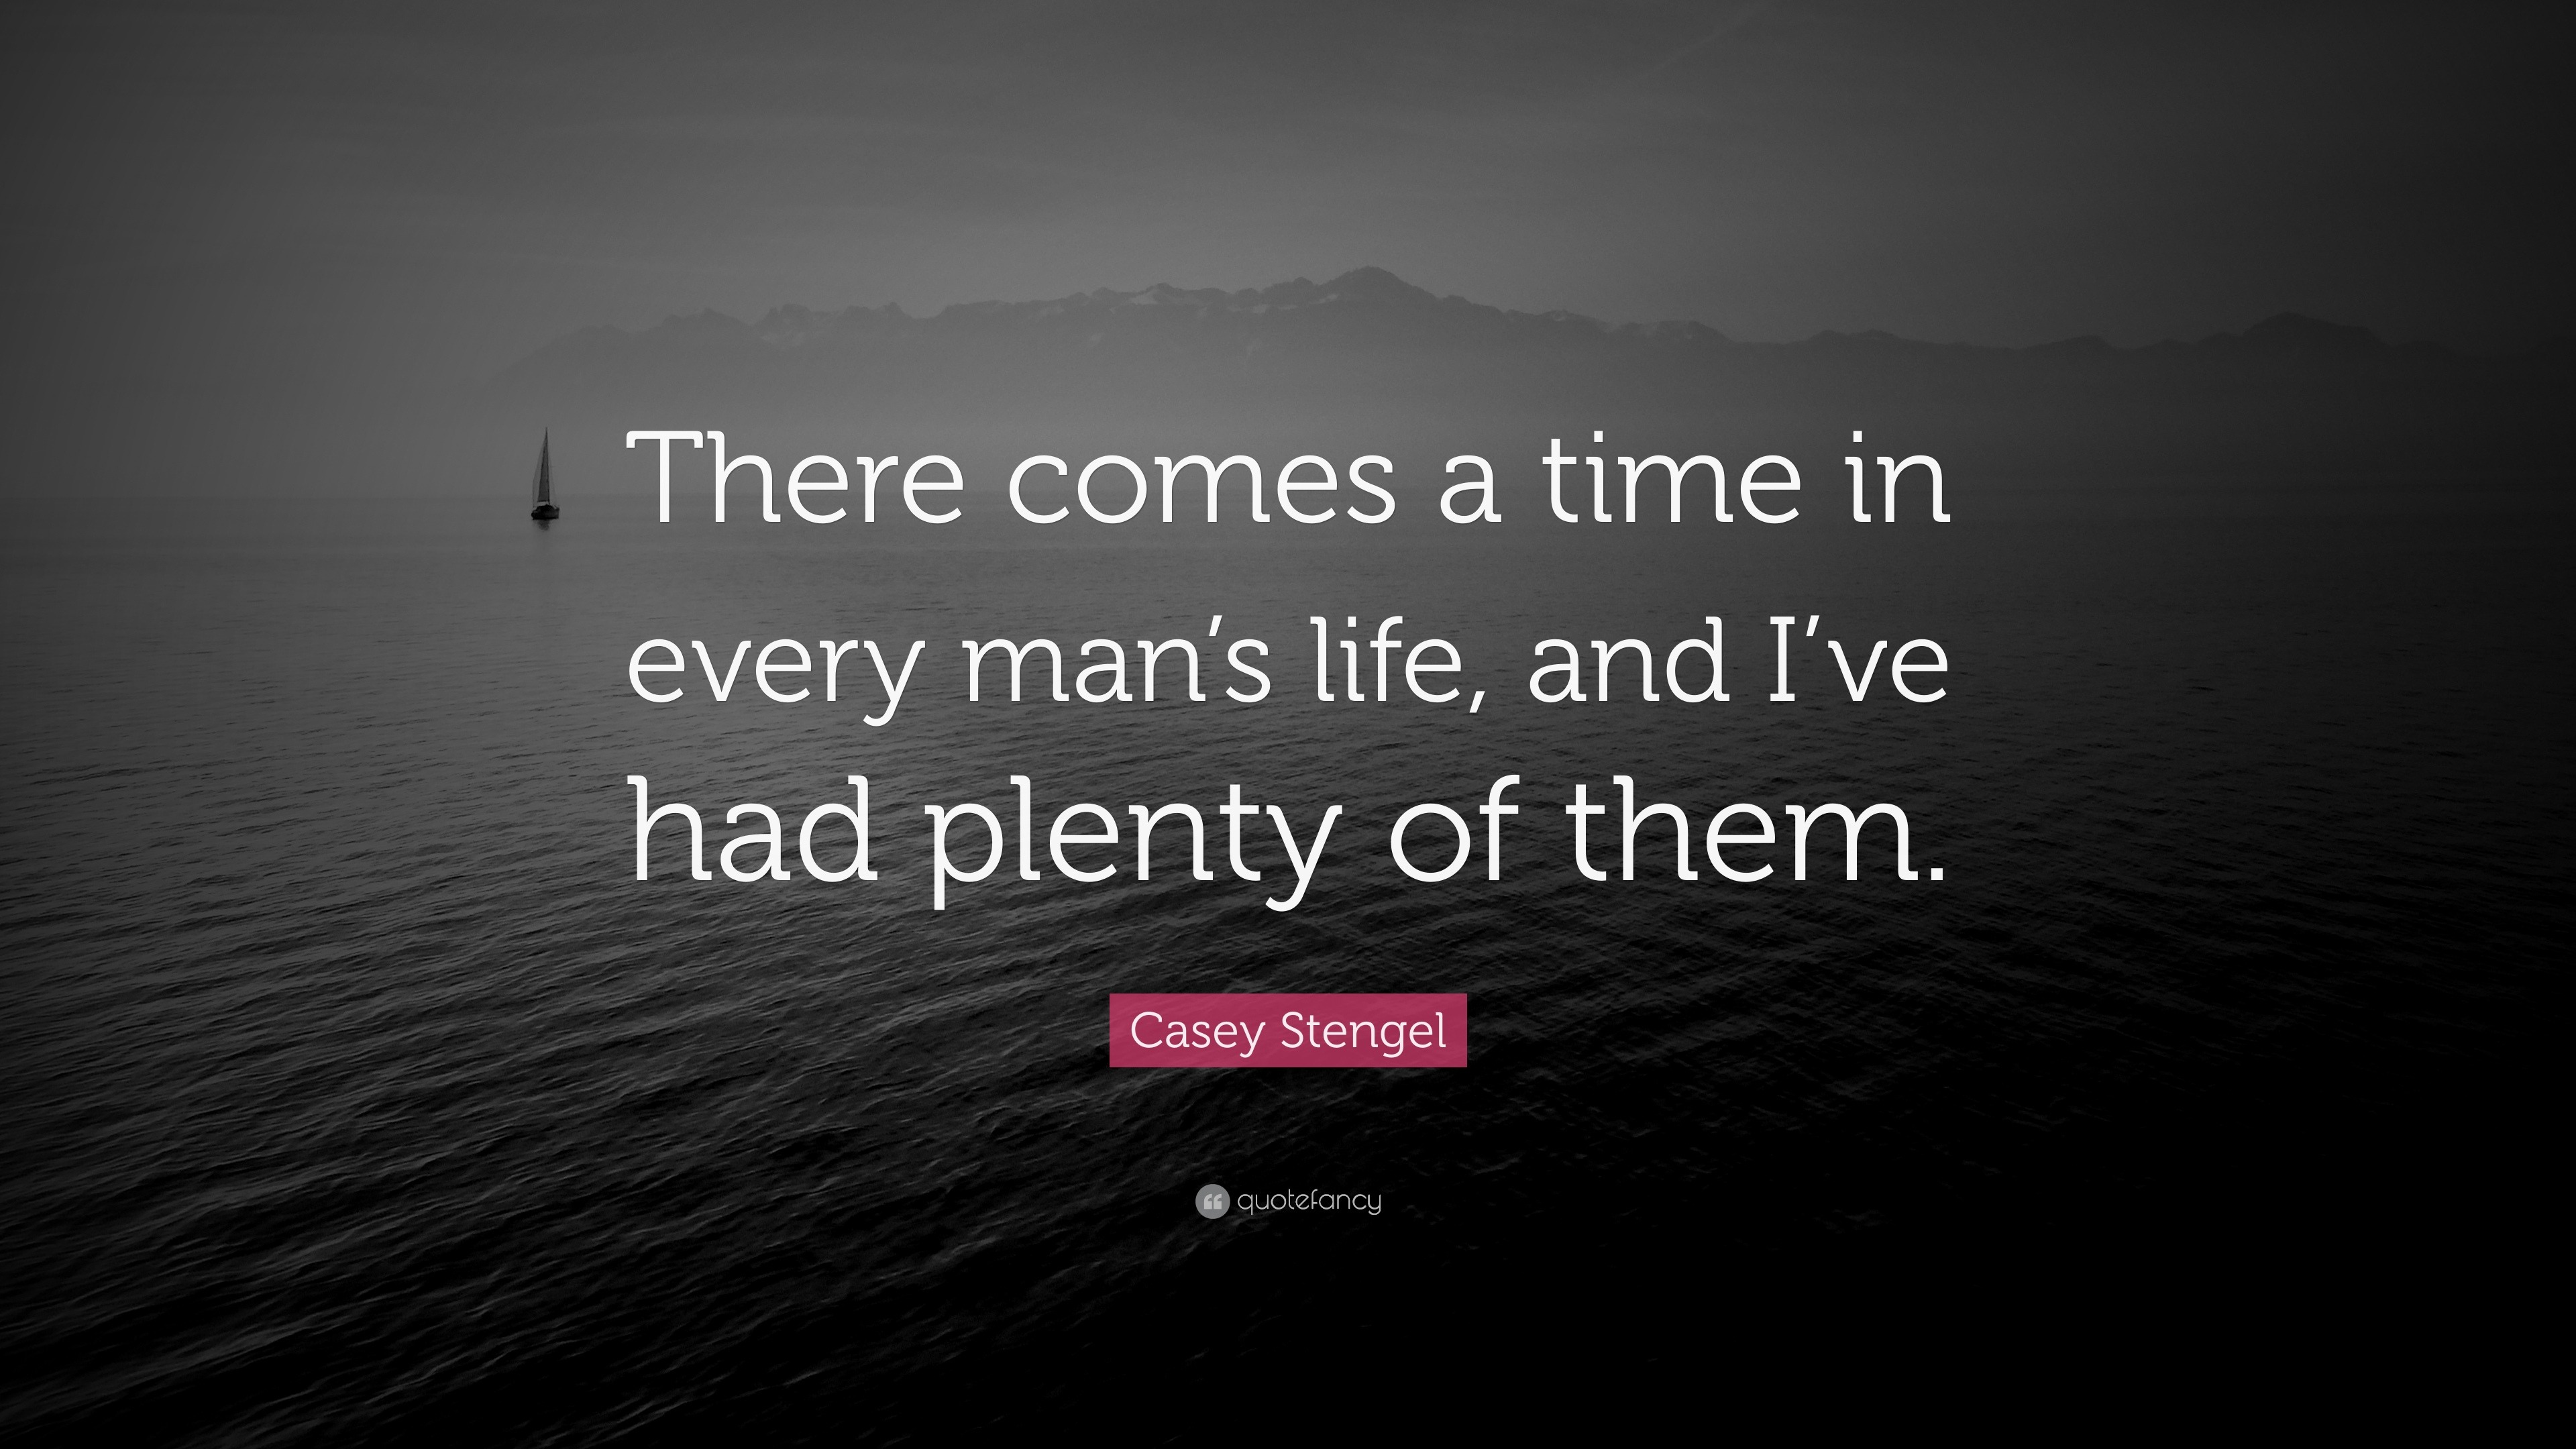 Casey Stengel Quote: “There comes a time in every man’s life, and I’ve ...